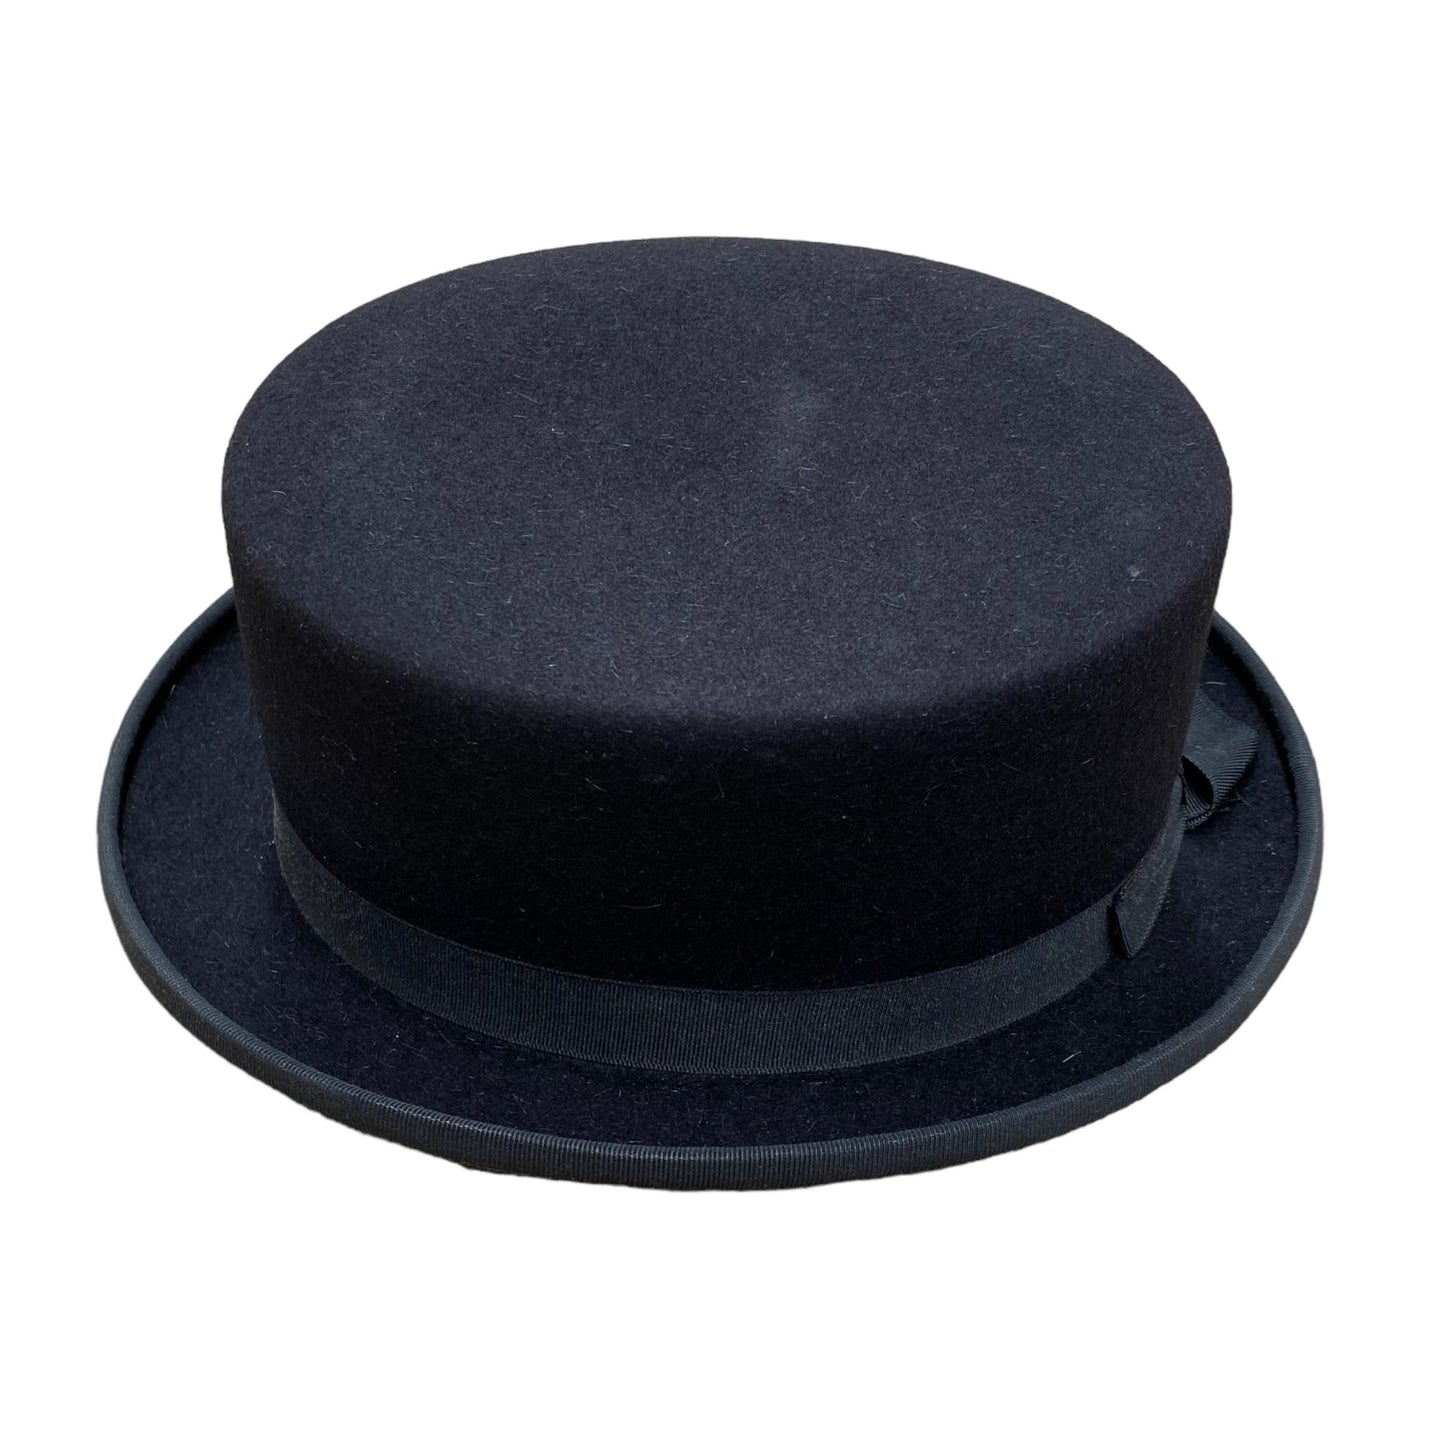 Top Hat 55 Black With Box (2313811)